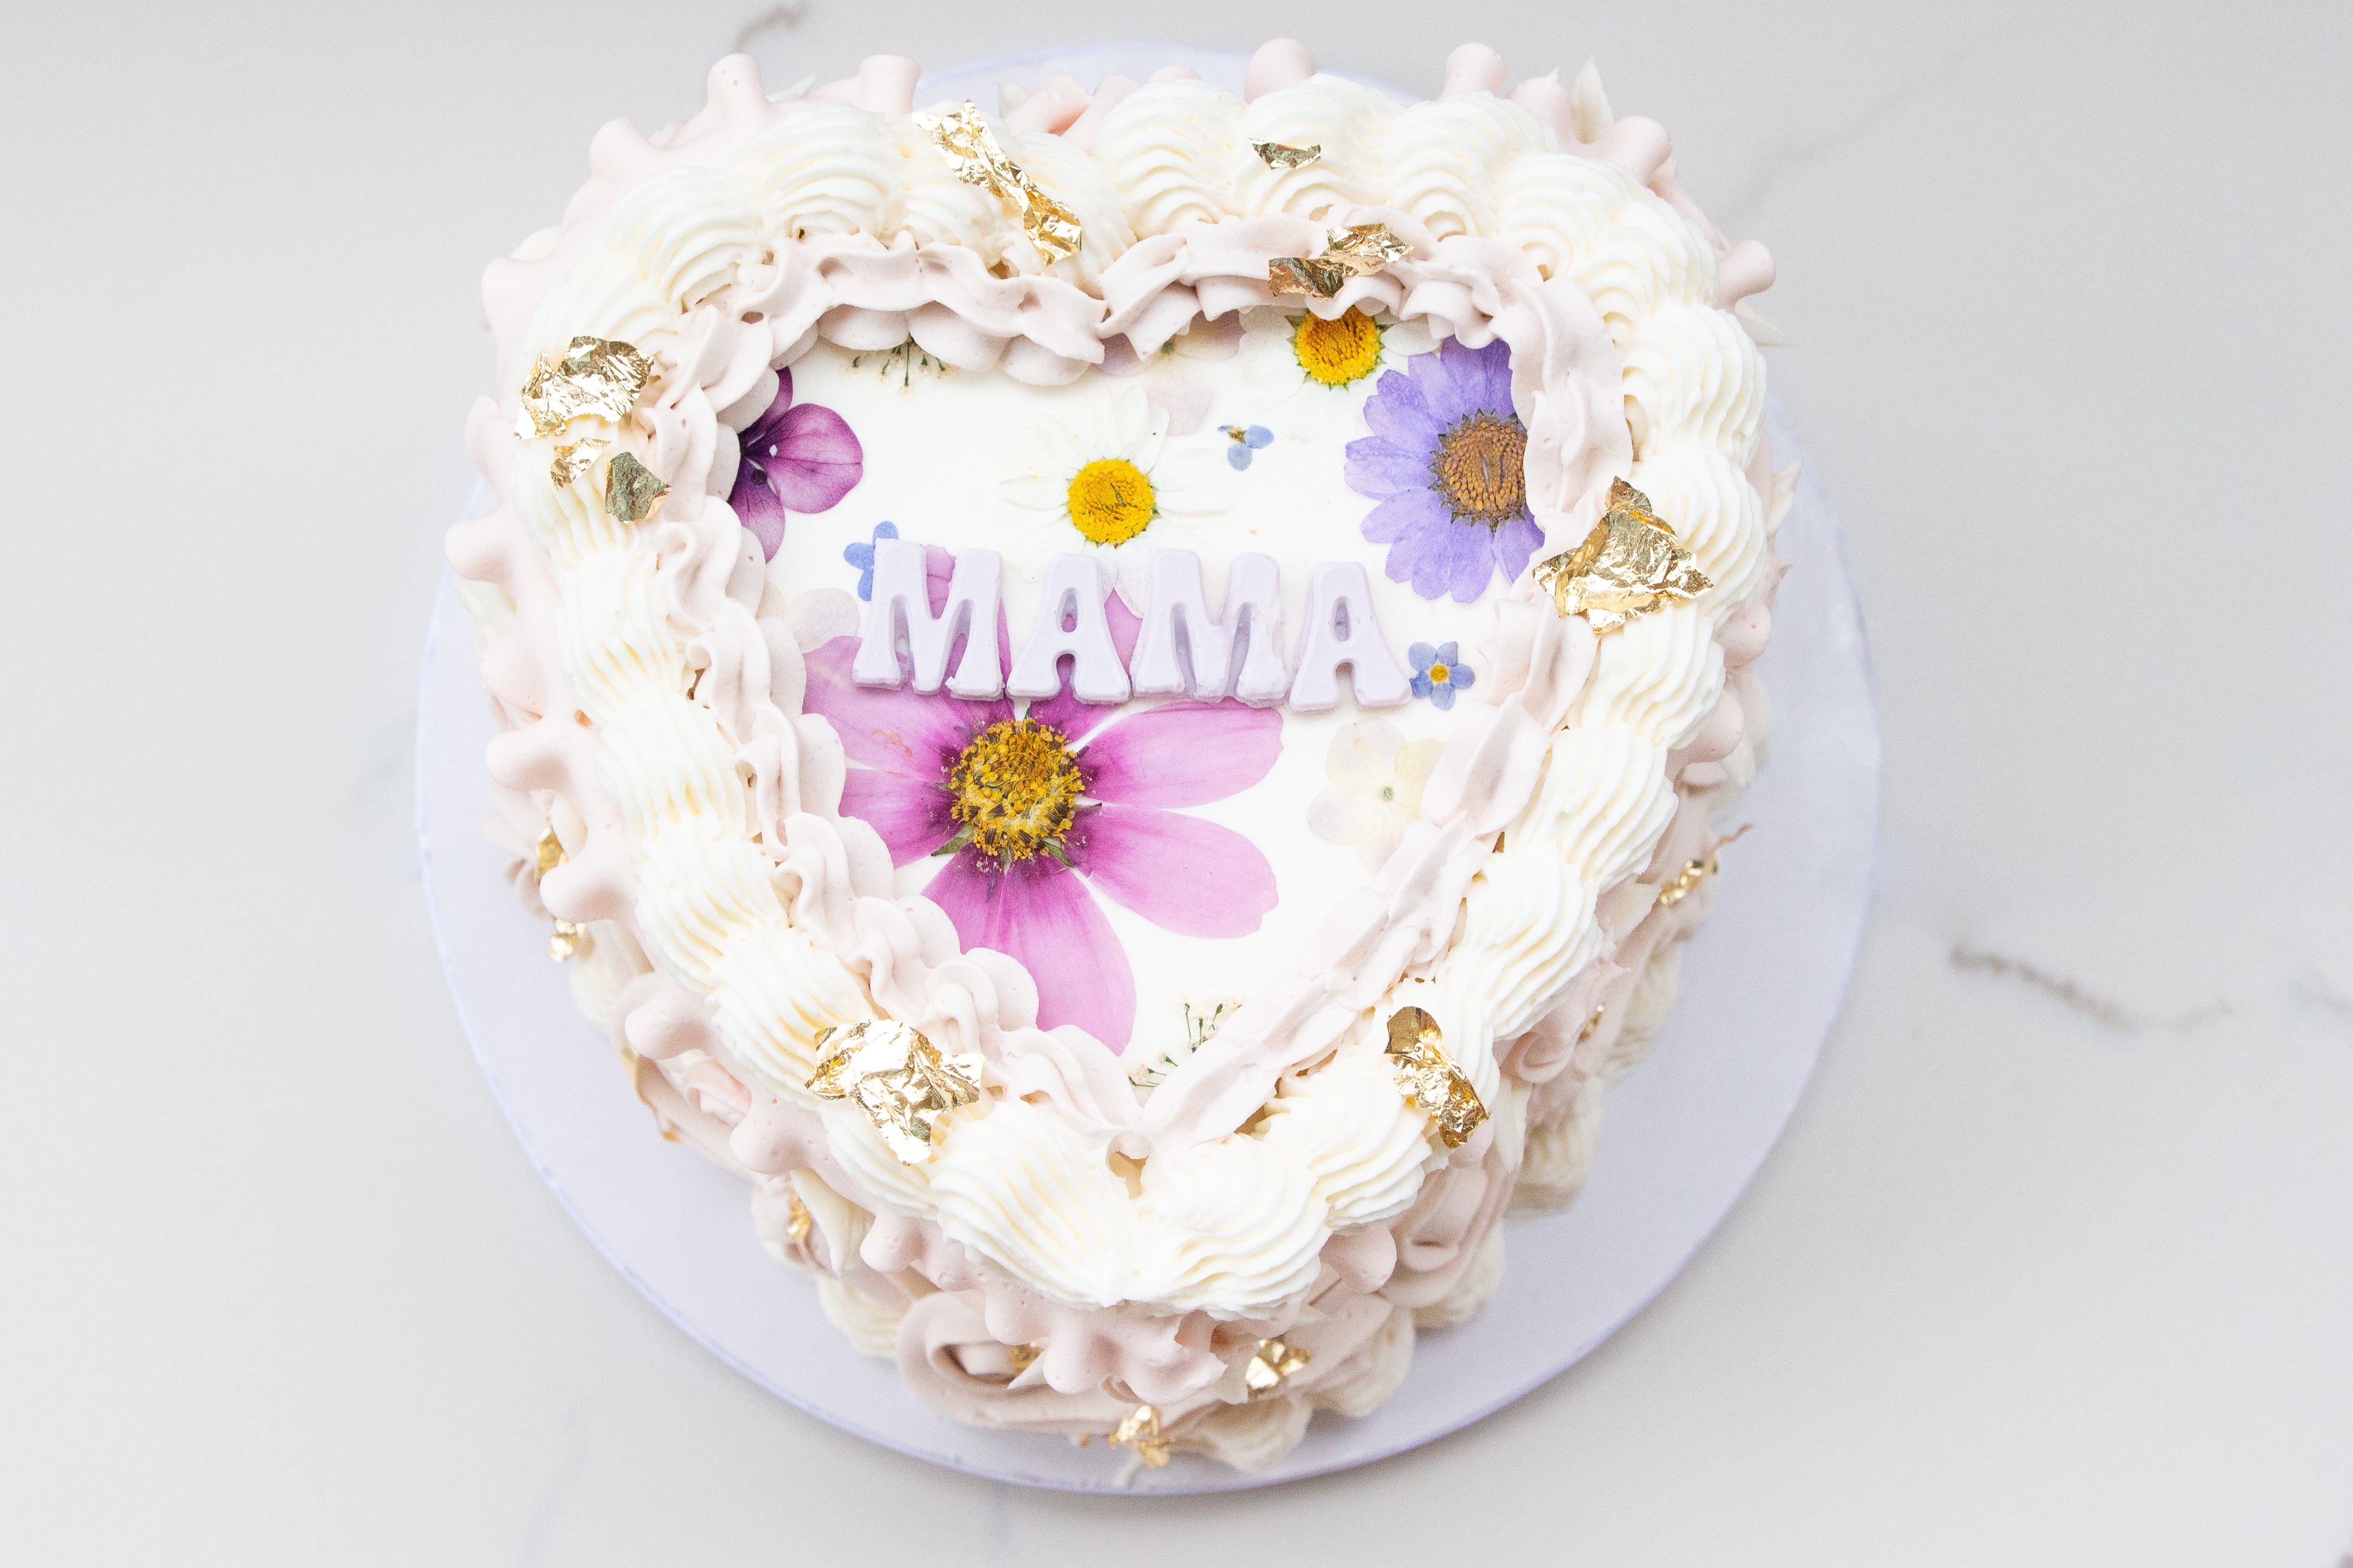 Happy Birthday Mama Cake Topper, Pink Gold Glitter Mother's Day Cake Decor,  Mother Birthday Party Supplies, Mama Happy Bday Cake Decoration : Buy  Online at Best Price in KSA - Souq is